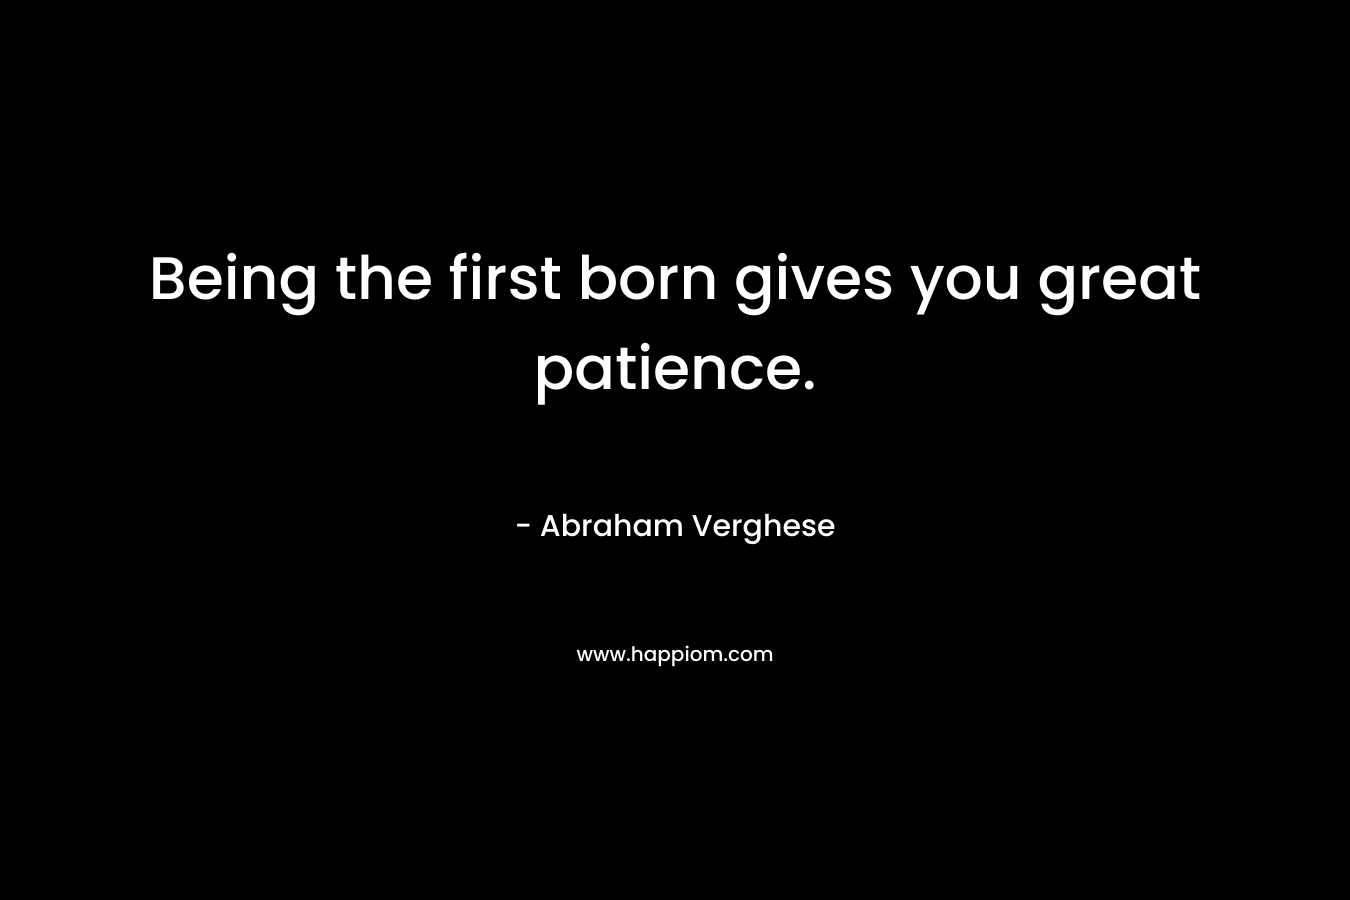 Being the first born gives you great patience.